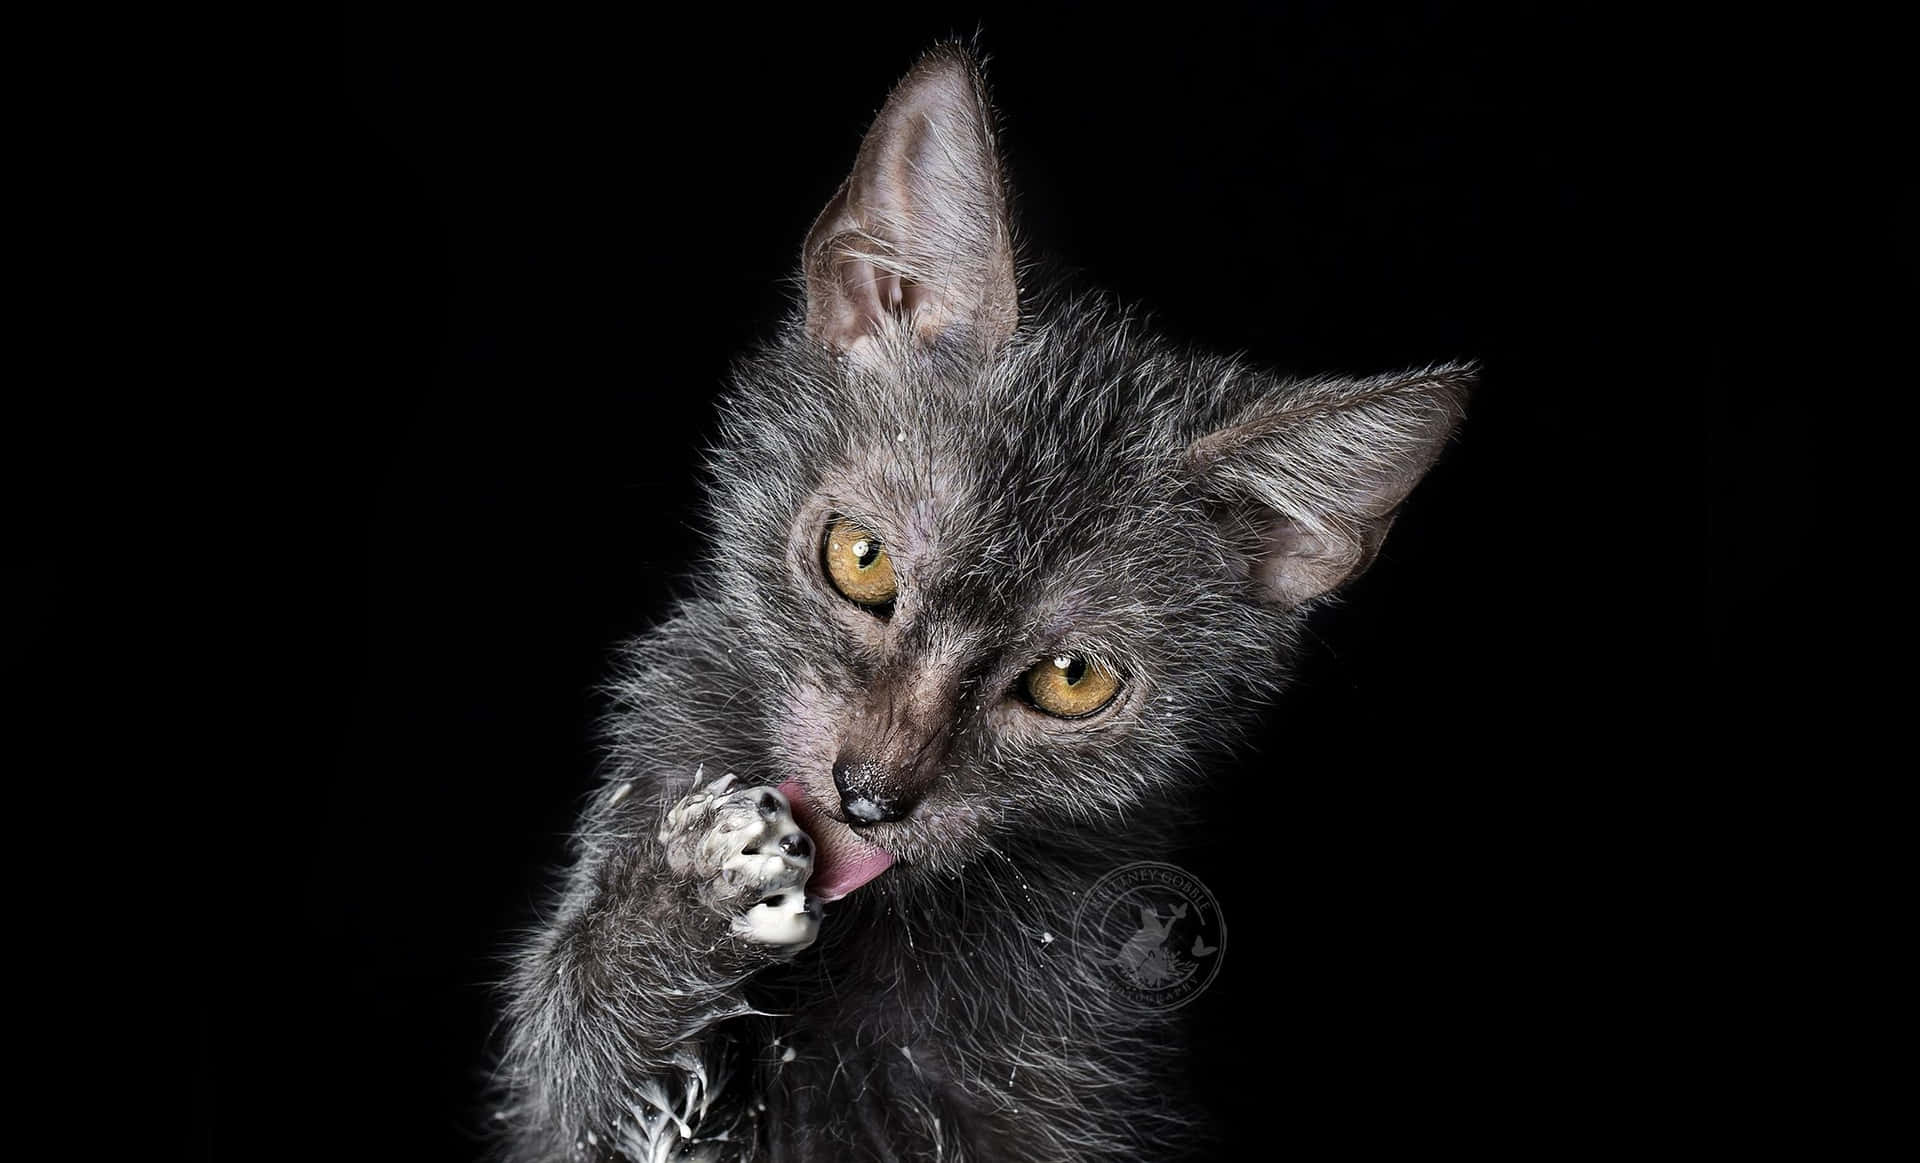 Unique black and white Lykoi cat staring with deep blue eyes Wallpaper